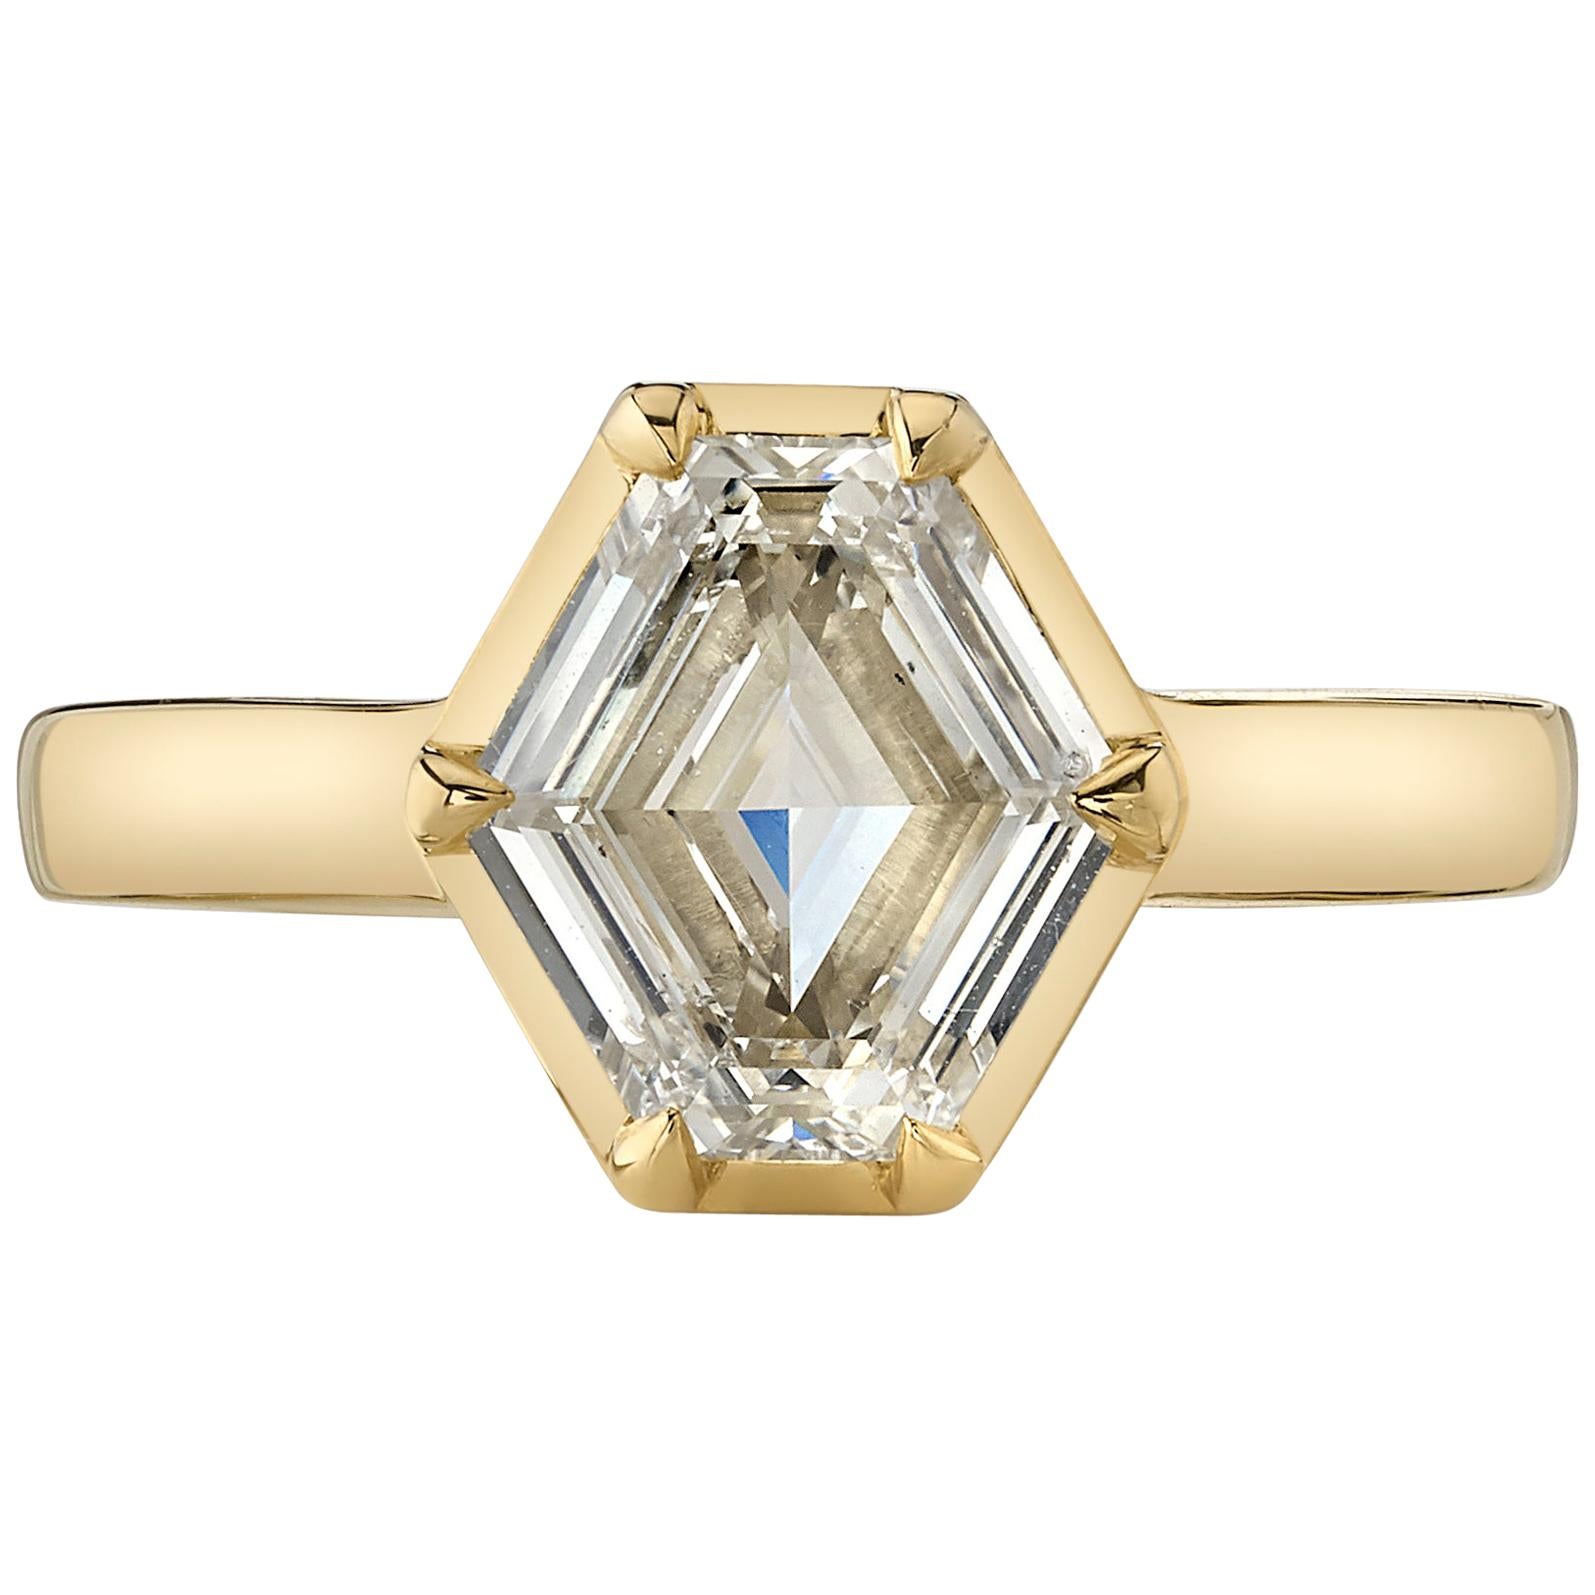 Handcrafted Odette Hexagonal Cut Diamond Ring by Single Stone